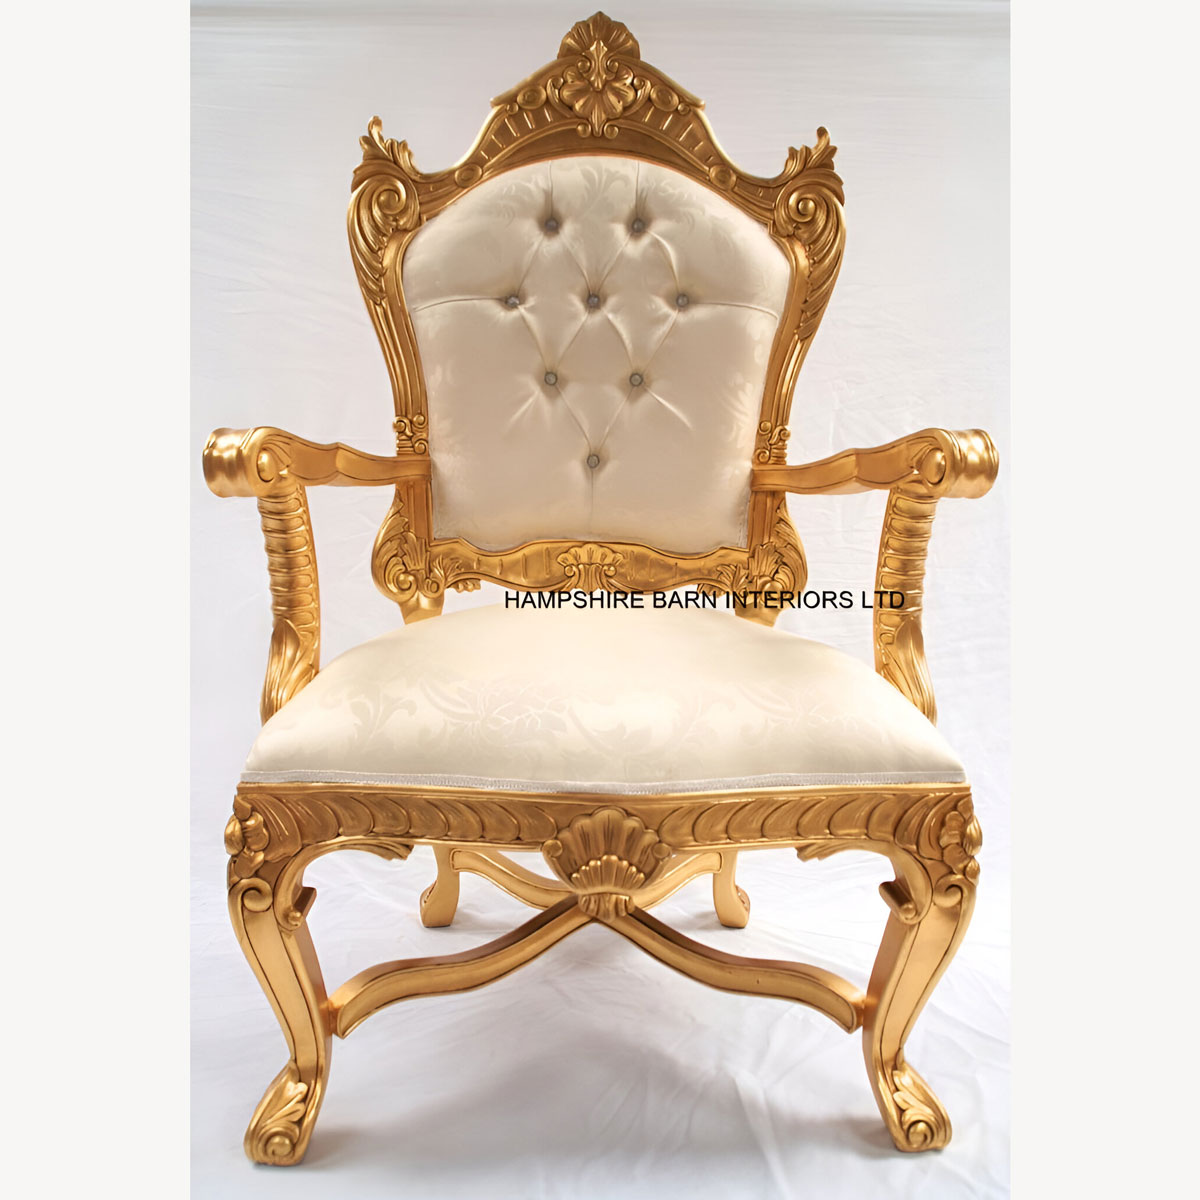 Gold Leaf Diamond Trono Ultimo Di Diamante With Ivory Cream Fabric Upholstery Kings Throne With Crystals 1 - Hampshire Barn Interiors - Gold Leaf Diamond Trono Ultimo Di Diamante With Ivory Cream Fabric Upholstery Kings Throne With Crystals -